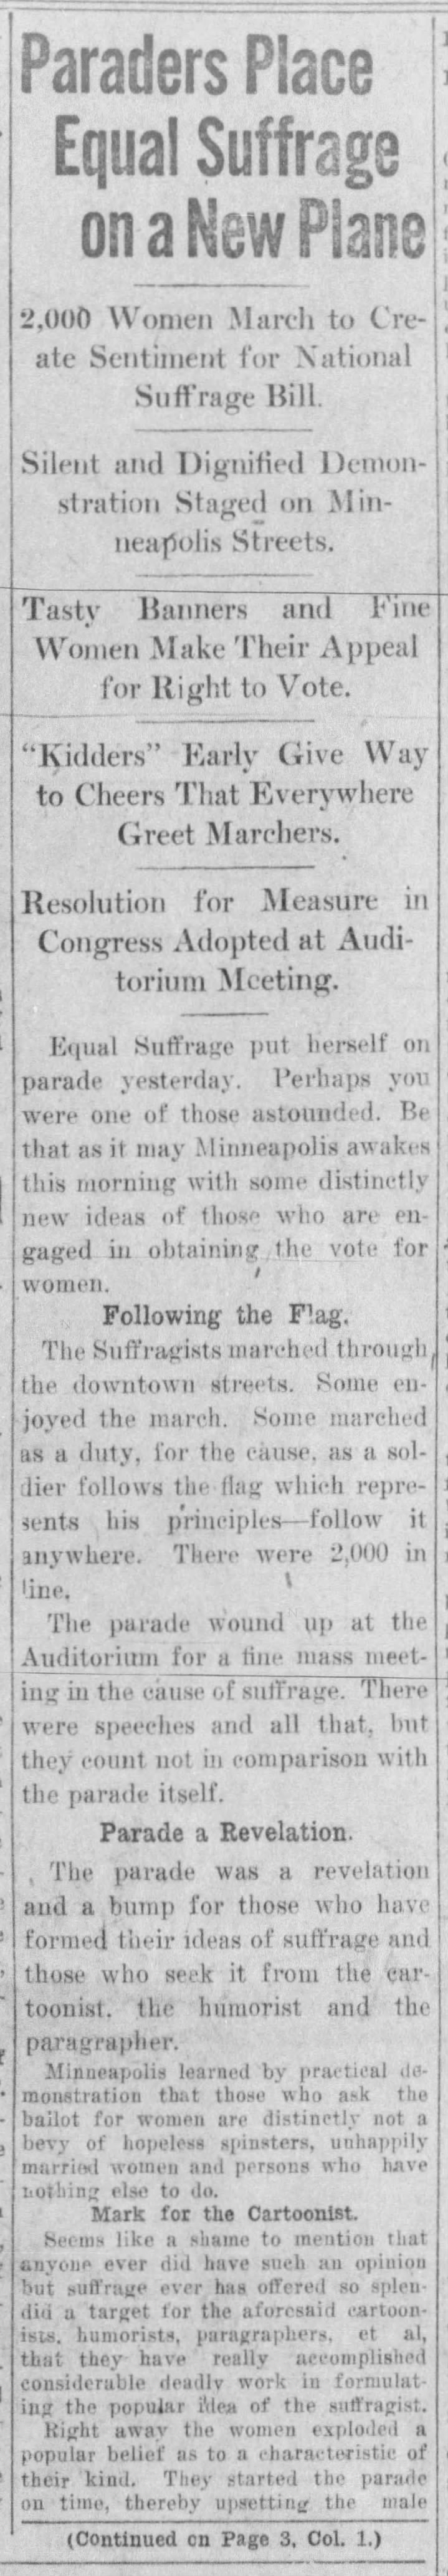 Paraders place equal suffrage on a new plane, pg 1